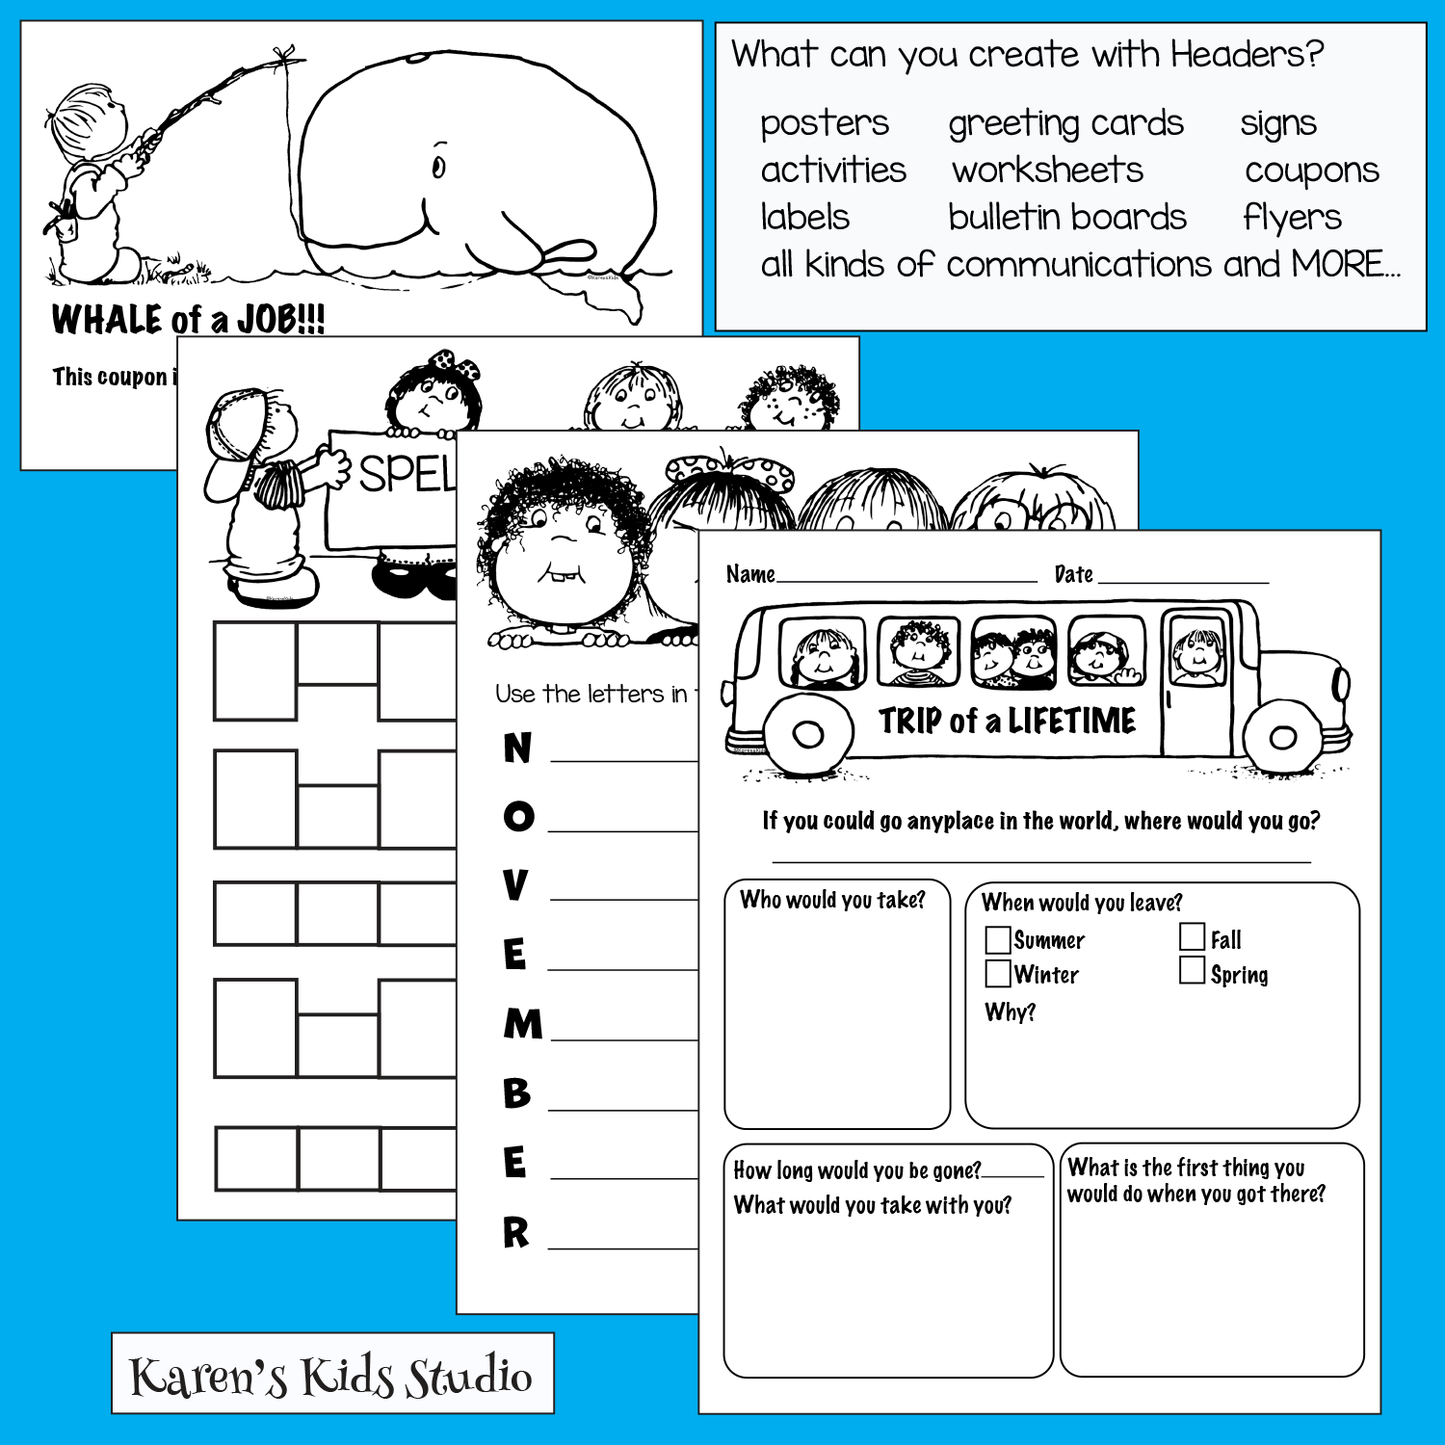 Headers and Footers Clipart School Home Play (Karen's Kids Clipart)